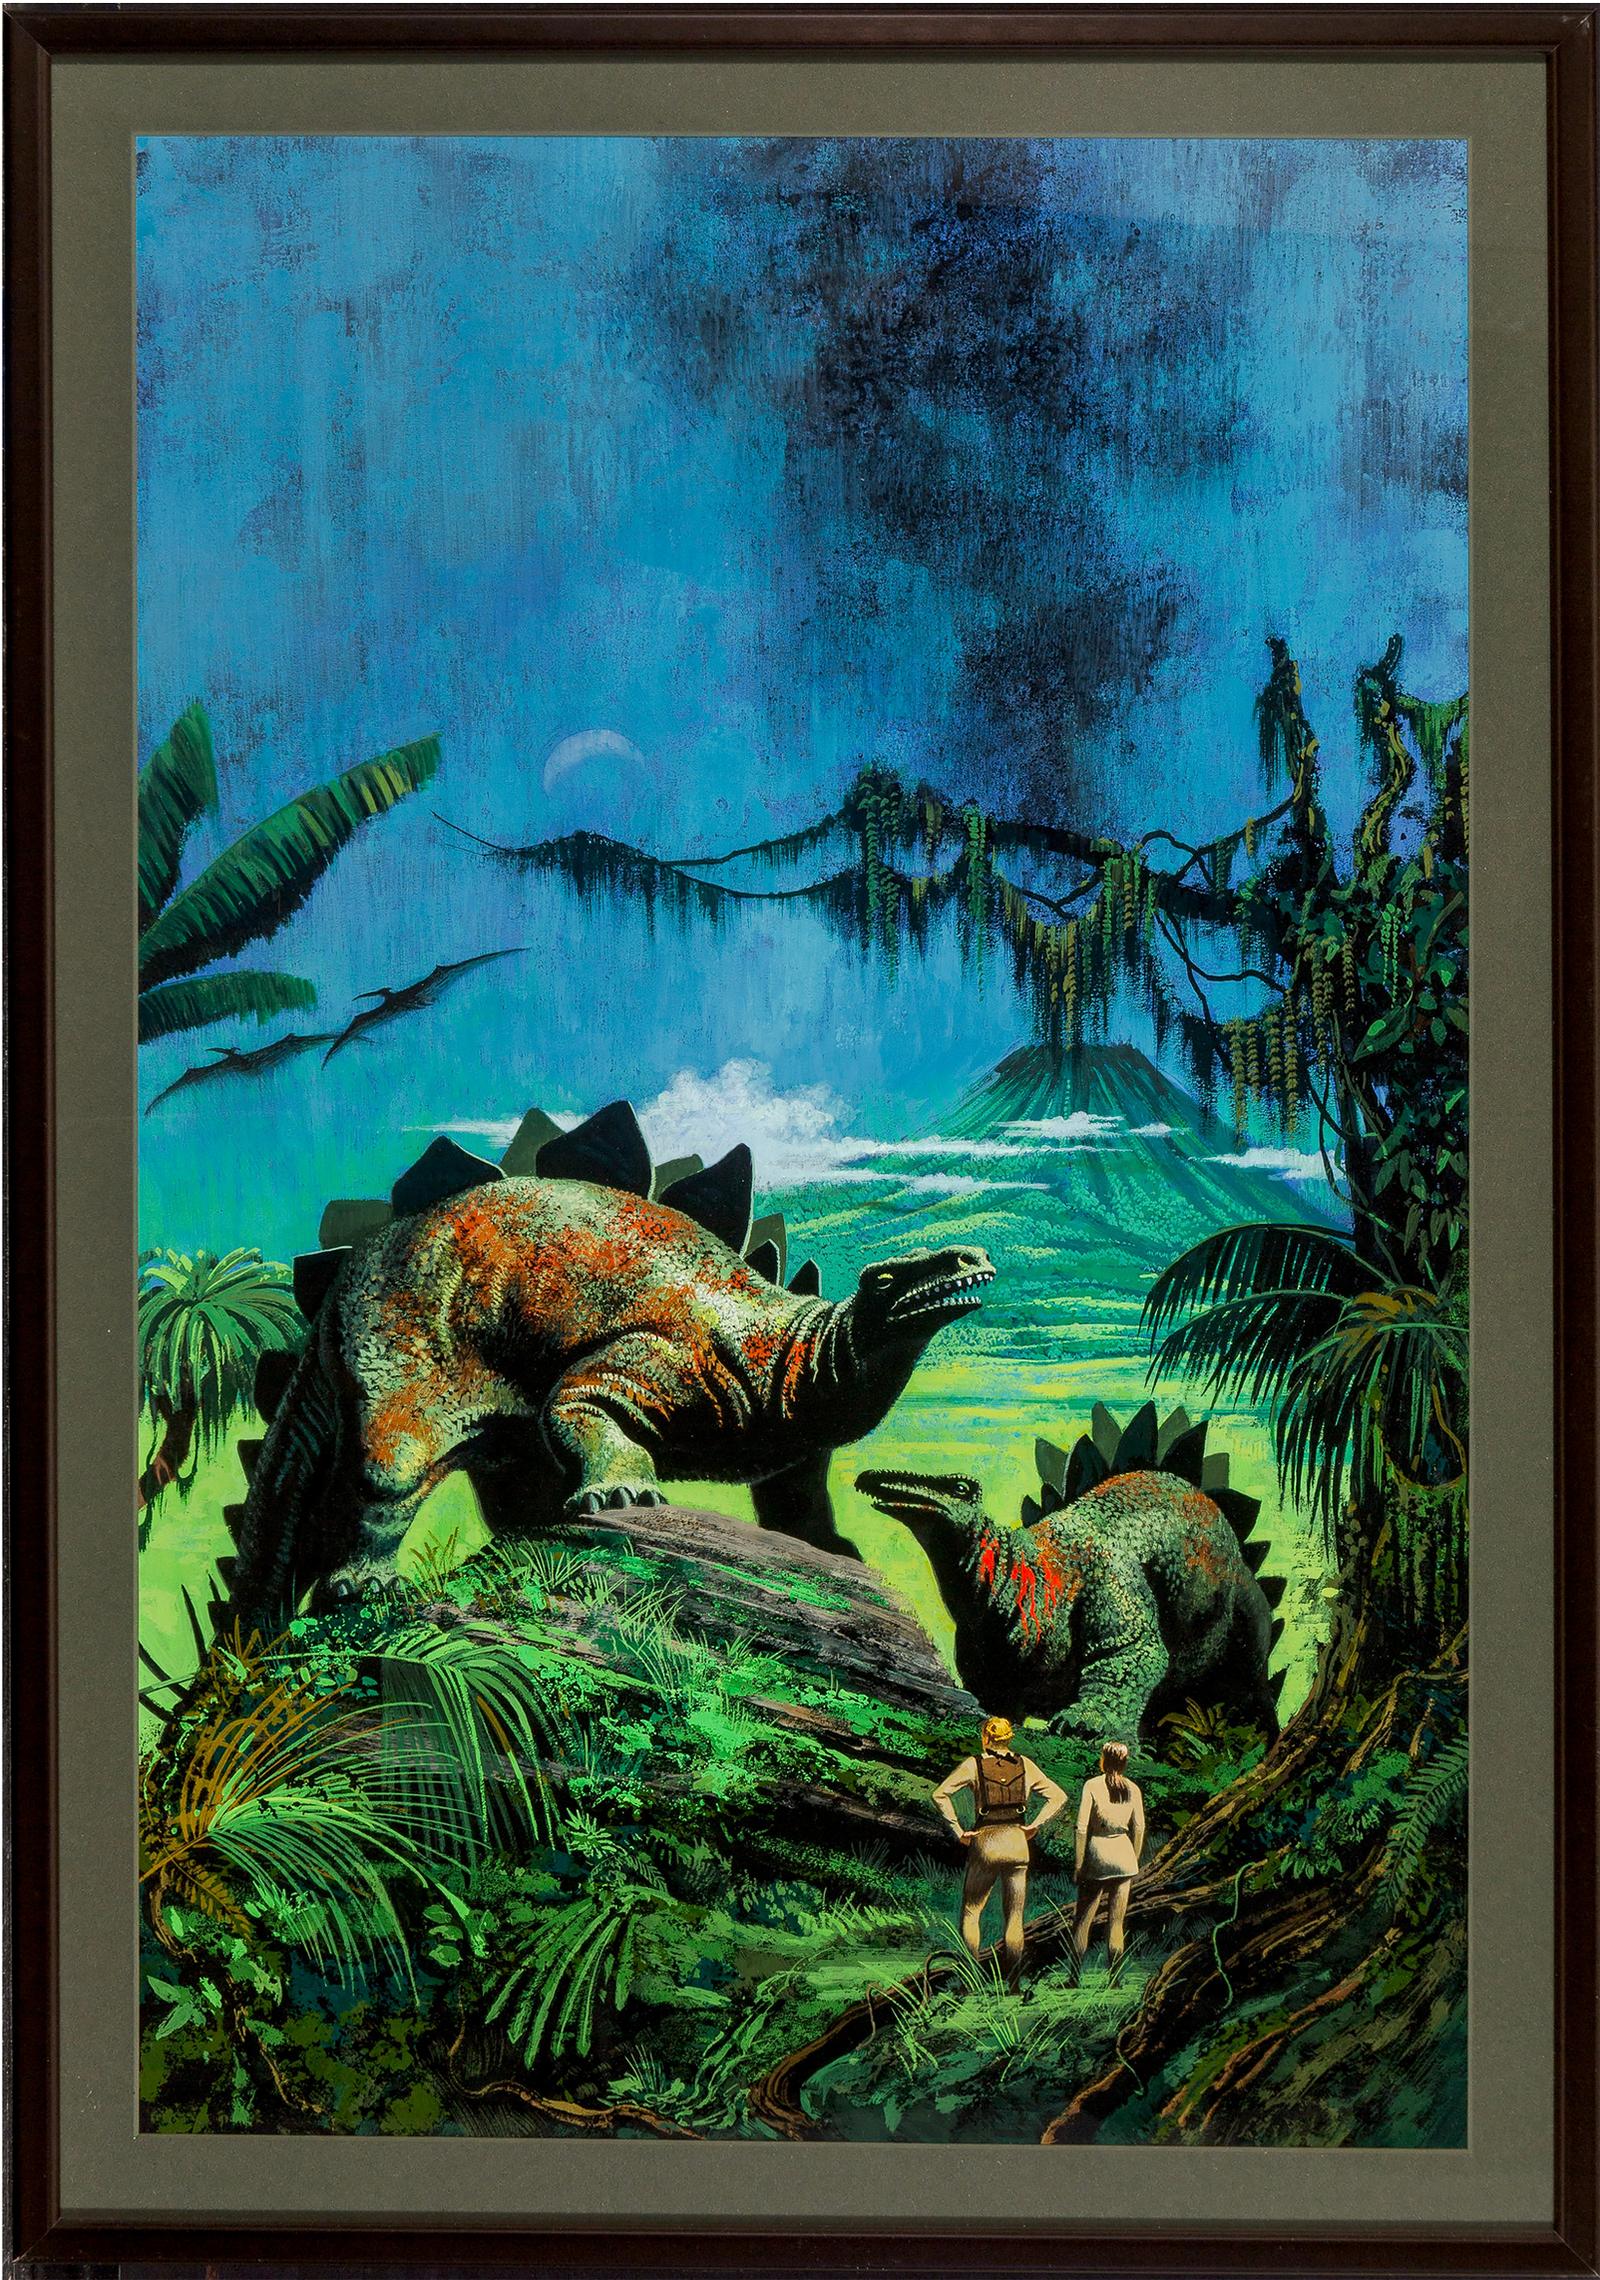 Dinosaurs and volcano. Jurassic park like image - Painting by Don Punchatz